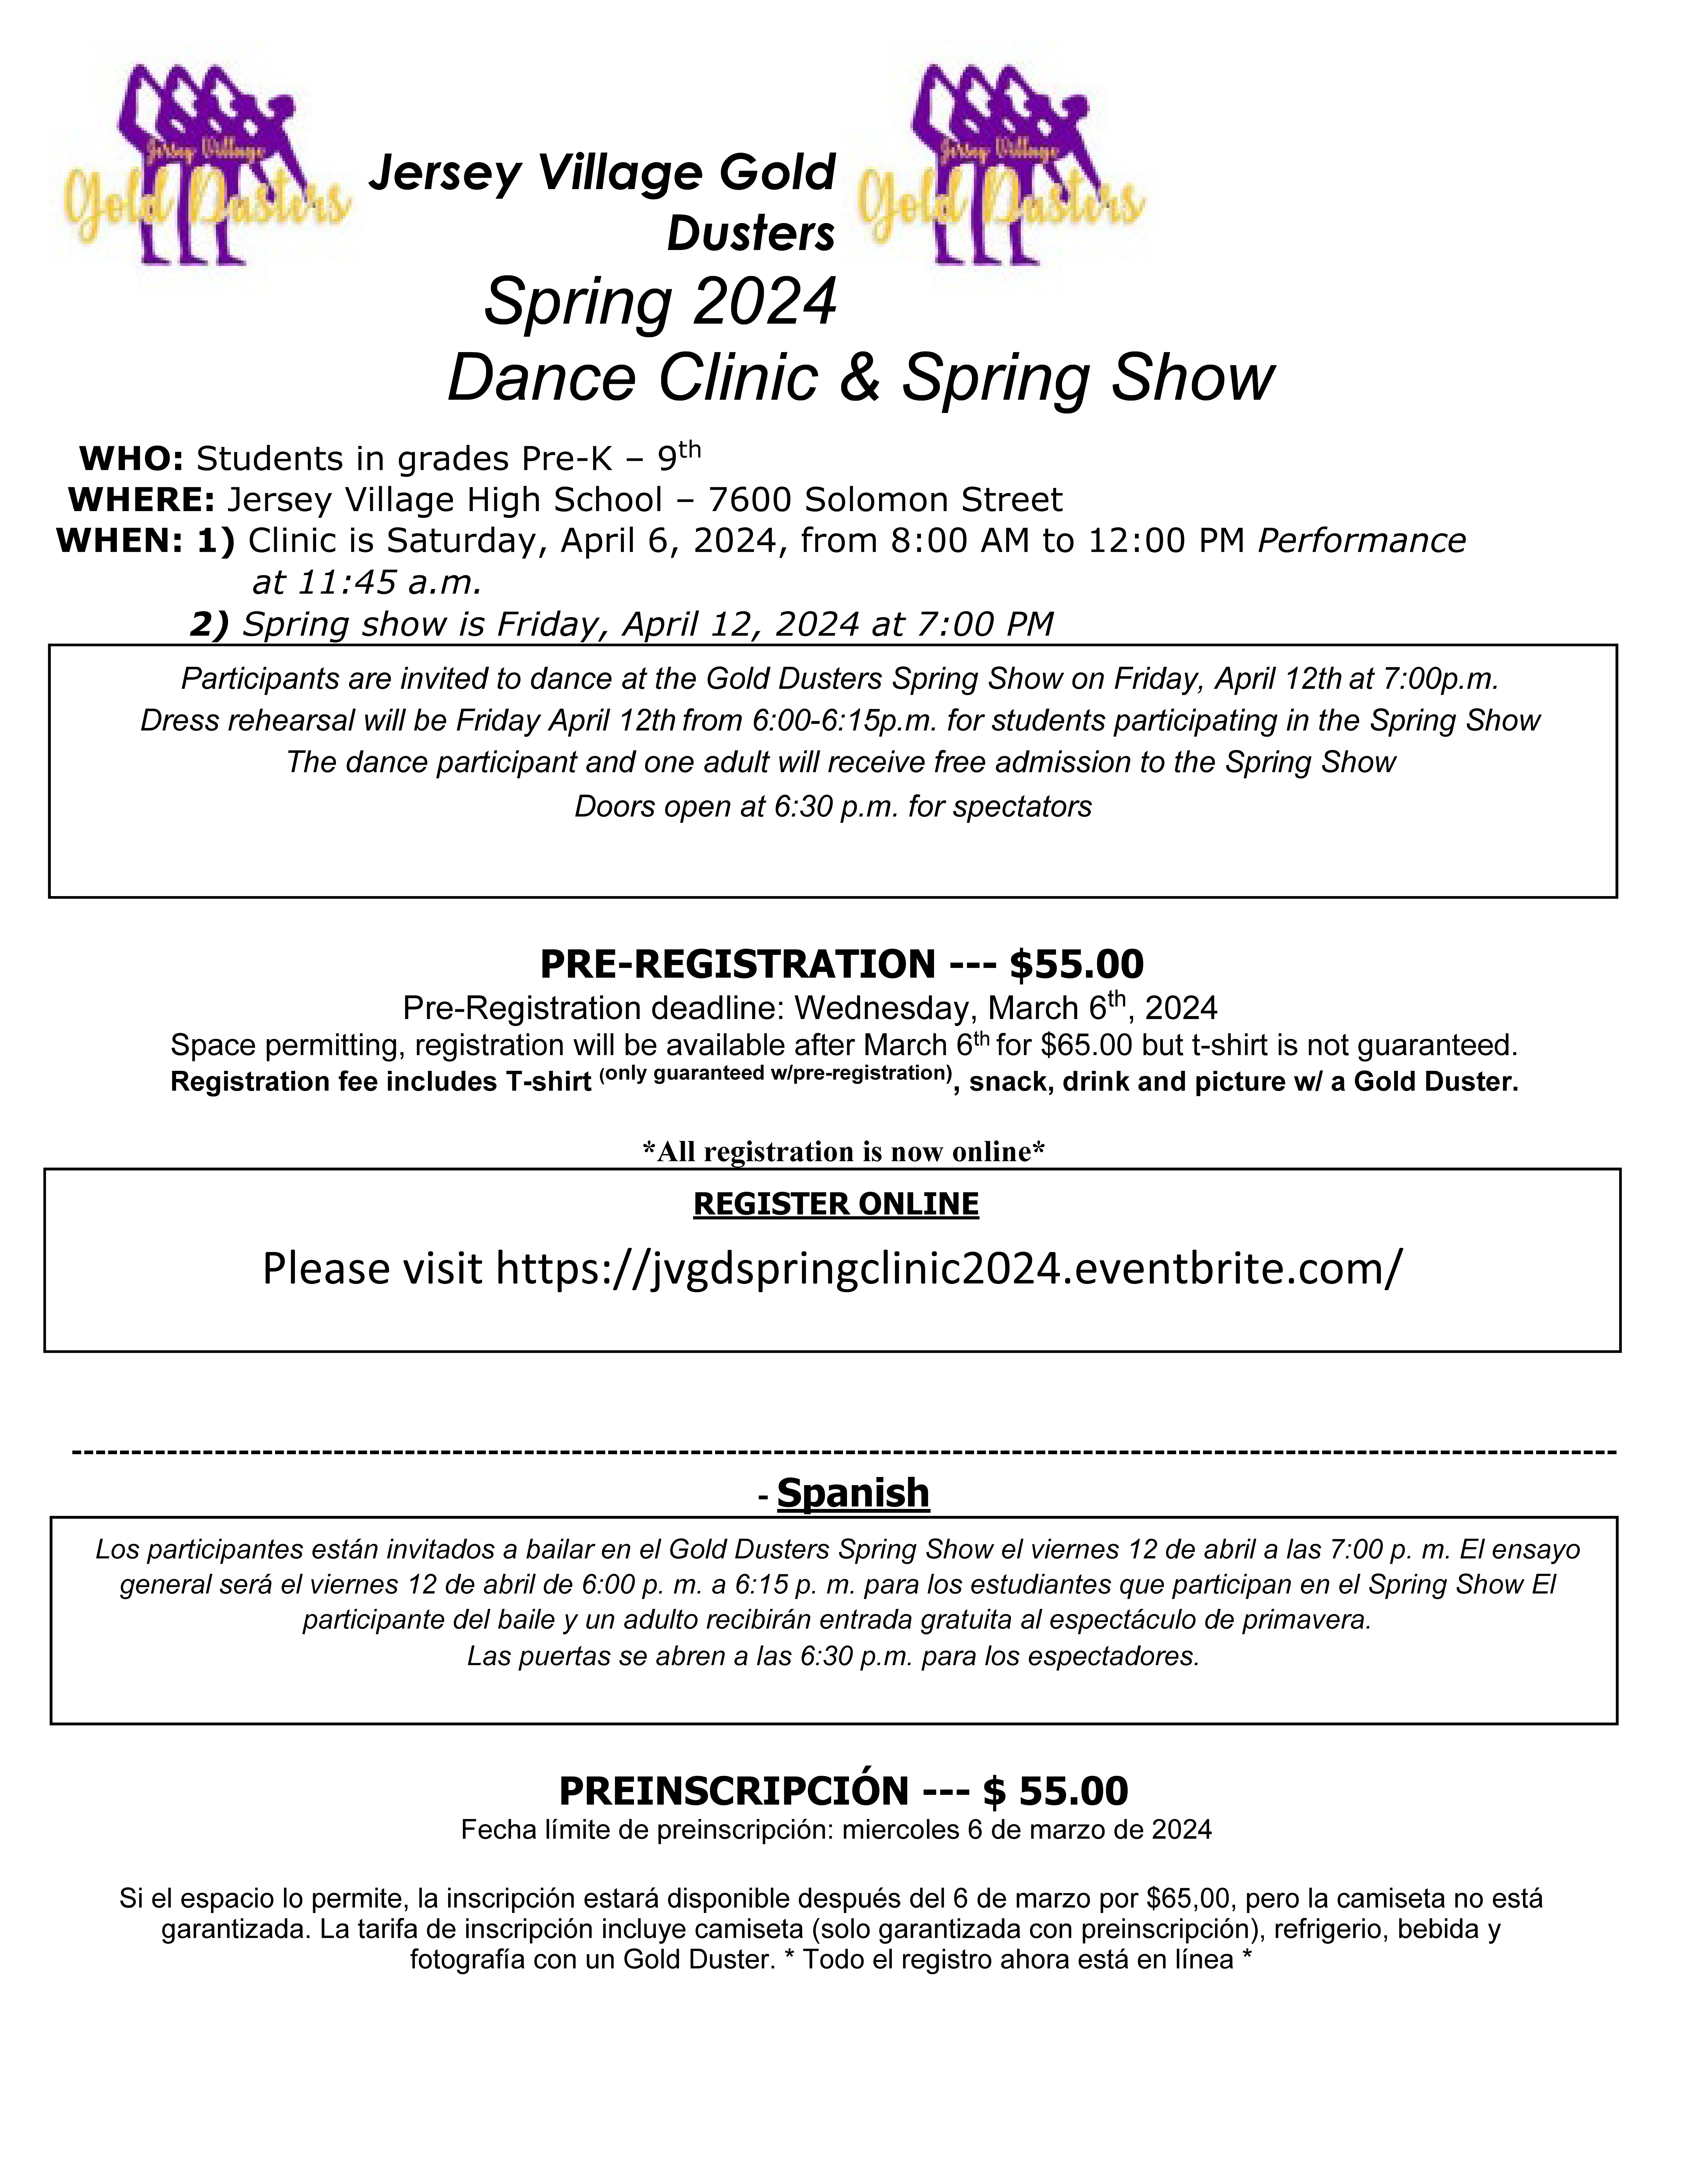 JVHS Gold Dusters Spring 2024 Dance Clinic & Spring Show  WHO: Students in grades Pre-K – 9  WHERE: Jersey Village High School – 7600 Solomon Street  WHEN: Clinic is Saturday, April 6, 2024, from 8 a.m.-12 p.m.  Performance at Saturday, April 6, 202411:45 a.m. Spring show is Friday, Spring show is Friday, April 12, 2024 at 7:00 PM  PRE-REGISTRATION: $55.00 Pre-Registration deadline: Wednesday, March 6, 2024. Space permitting, registration will be available after March 6 for $65.00 but t-shirt is not guaranteed. Registration fee includes T-shirt, snack, drink and picture with a Gold Duster.  REGISTER ONLINE: Please visit https://jvgdspringclinic2024.eventbrite.com/